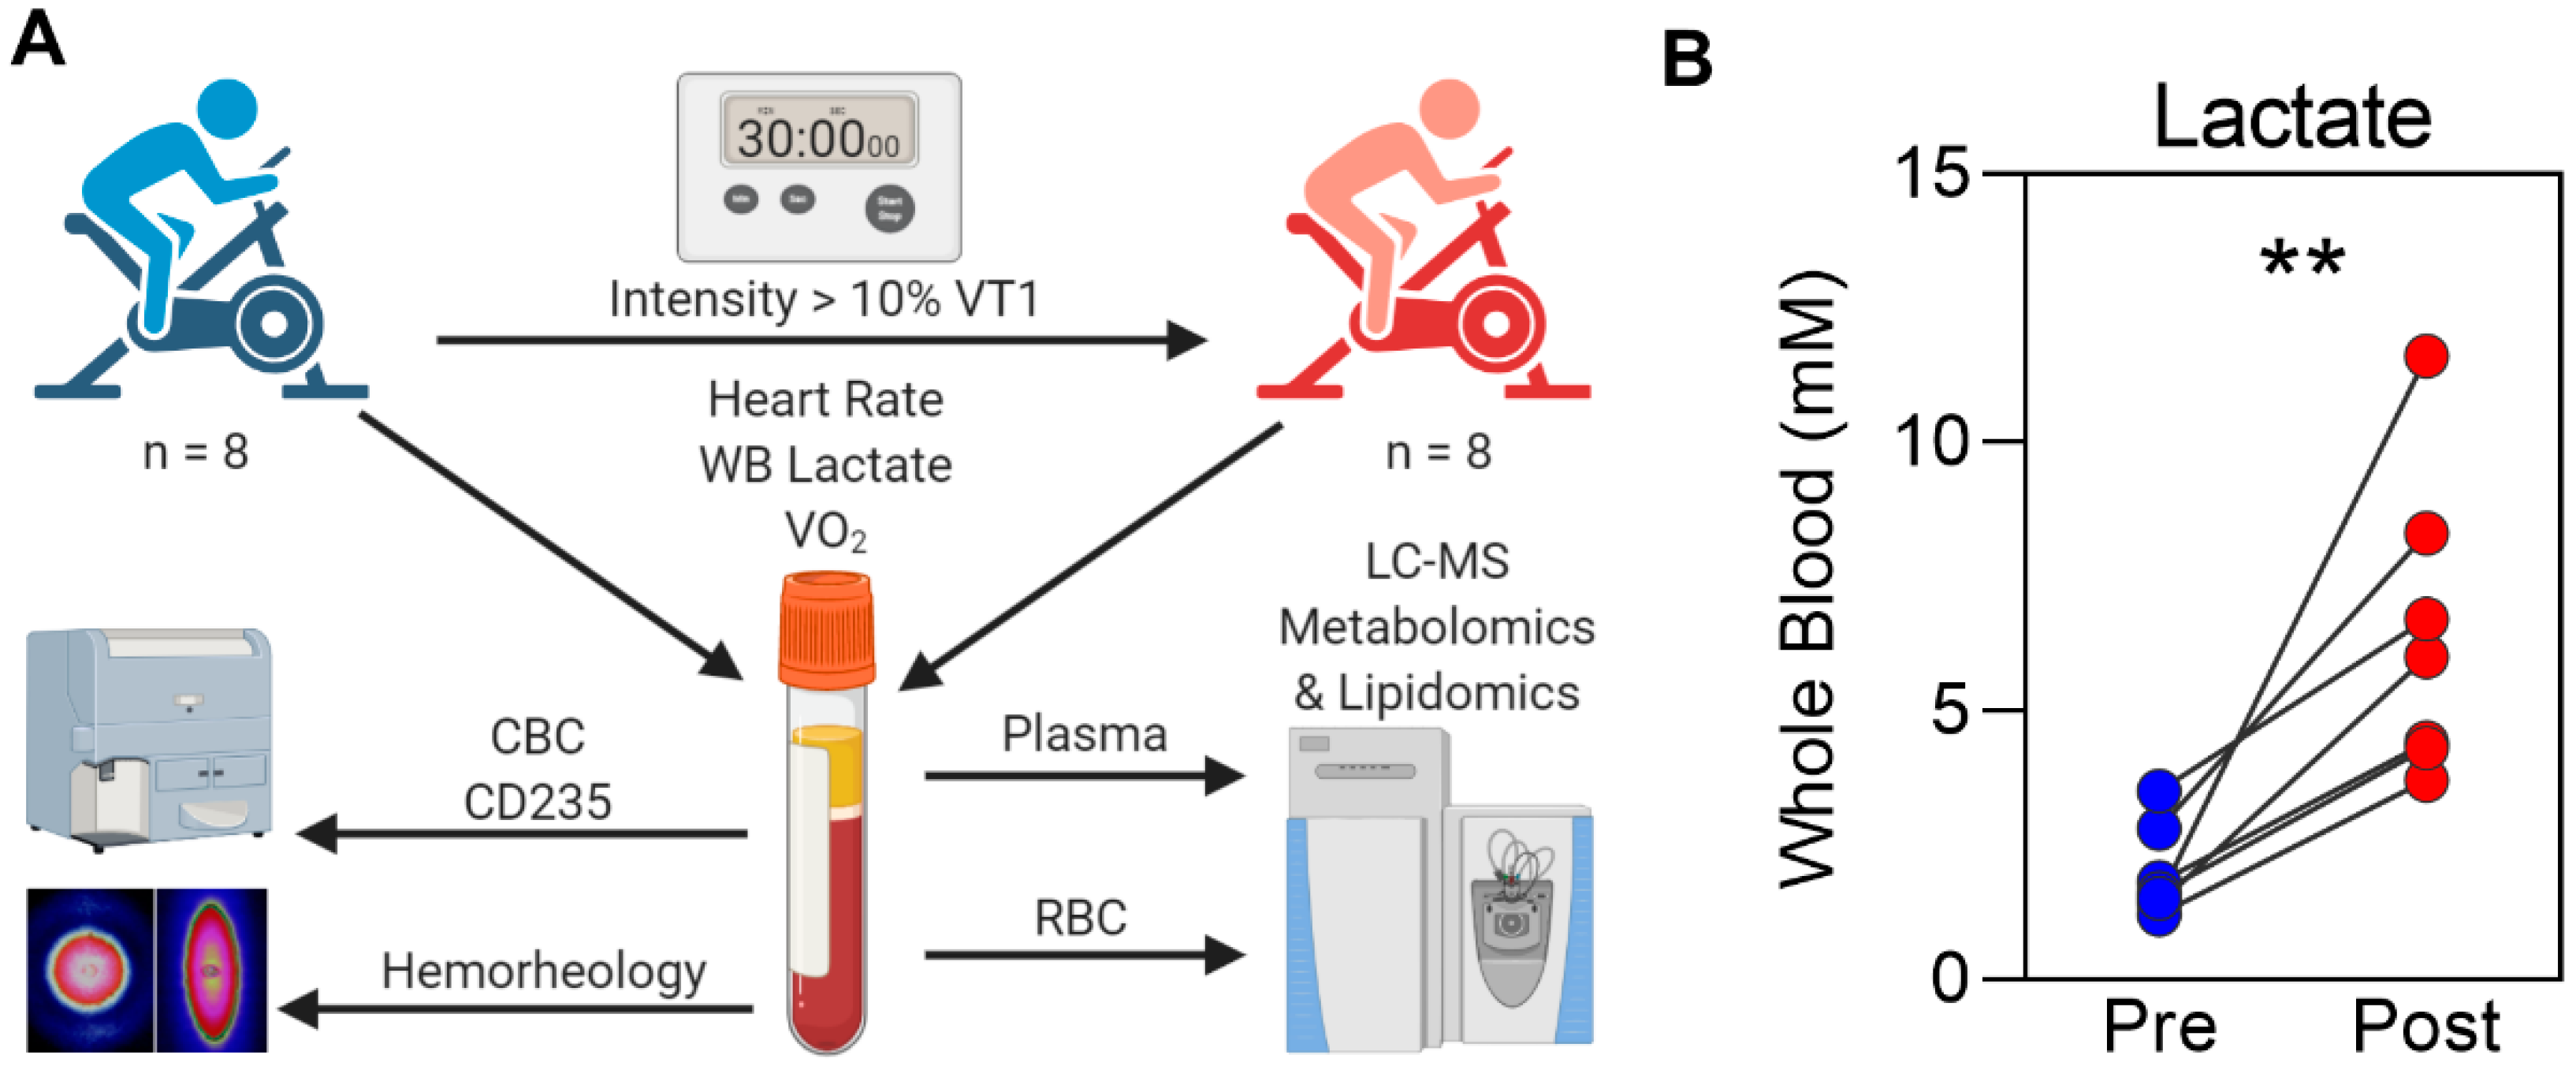 IJMS | Free Full-Text | Acute Cycling Exercise Induces Changes in Red Blood Cell and Membrane Remodeling | HTML